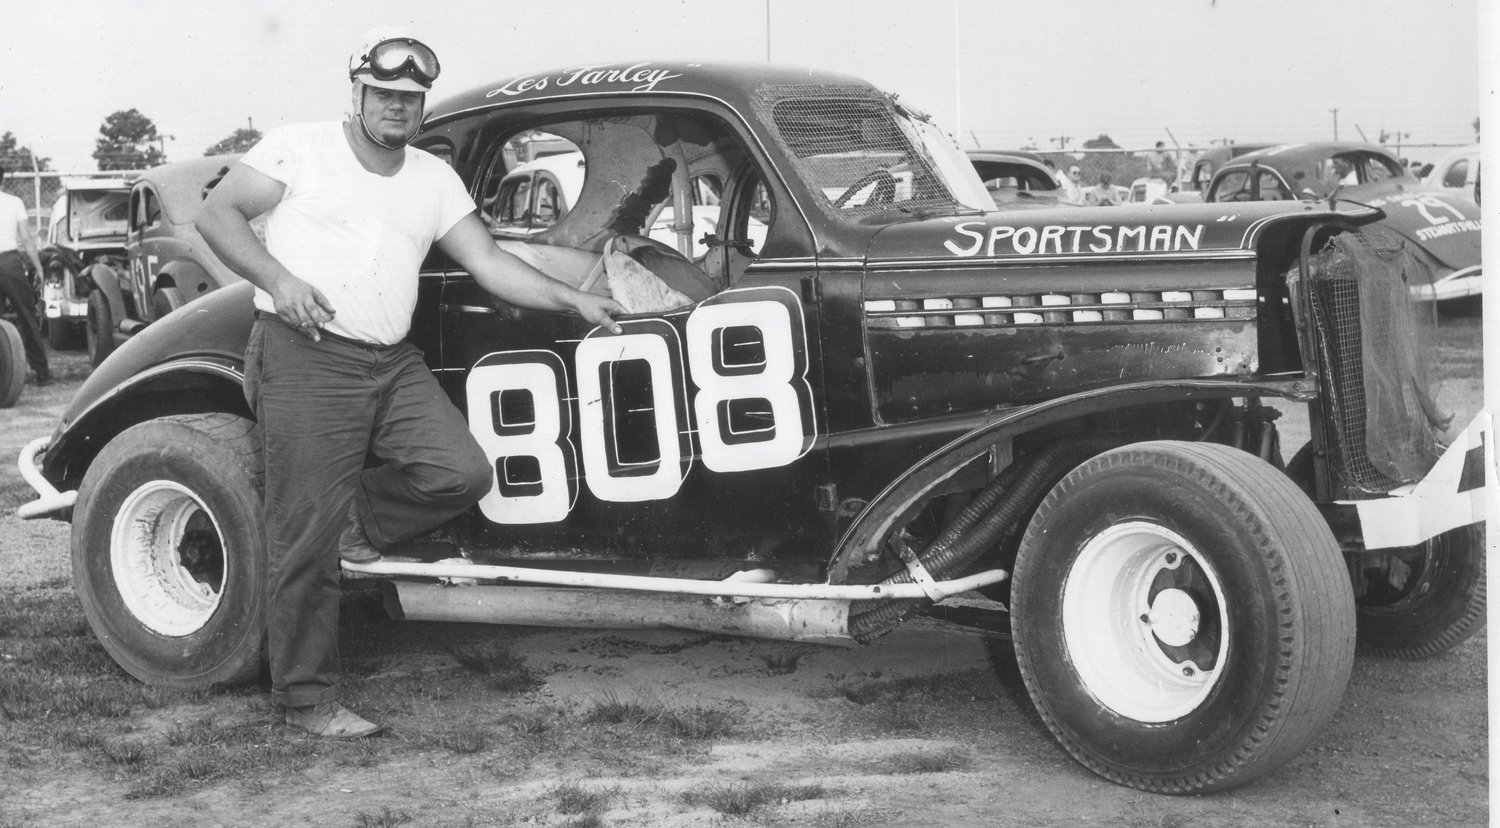 Driver Les Farley with his car, number 808.